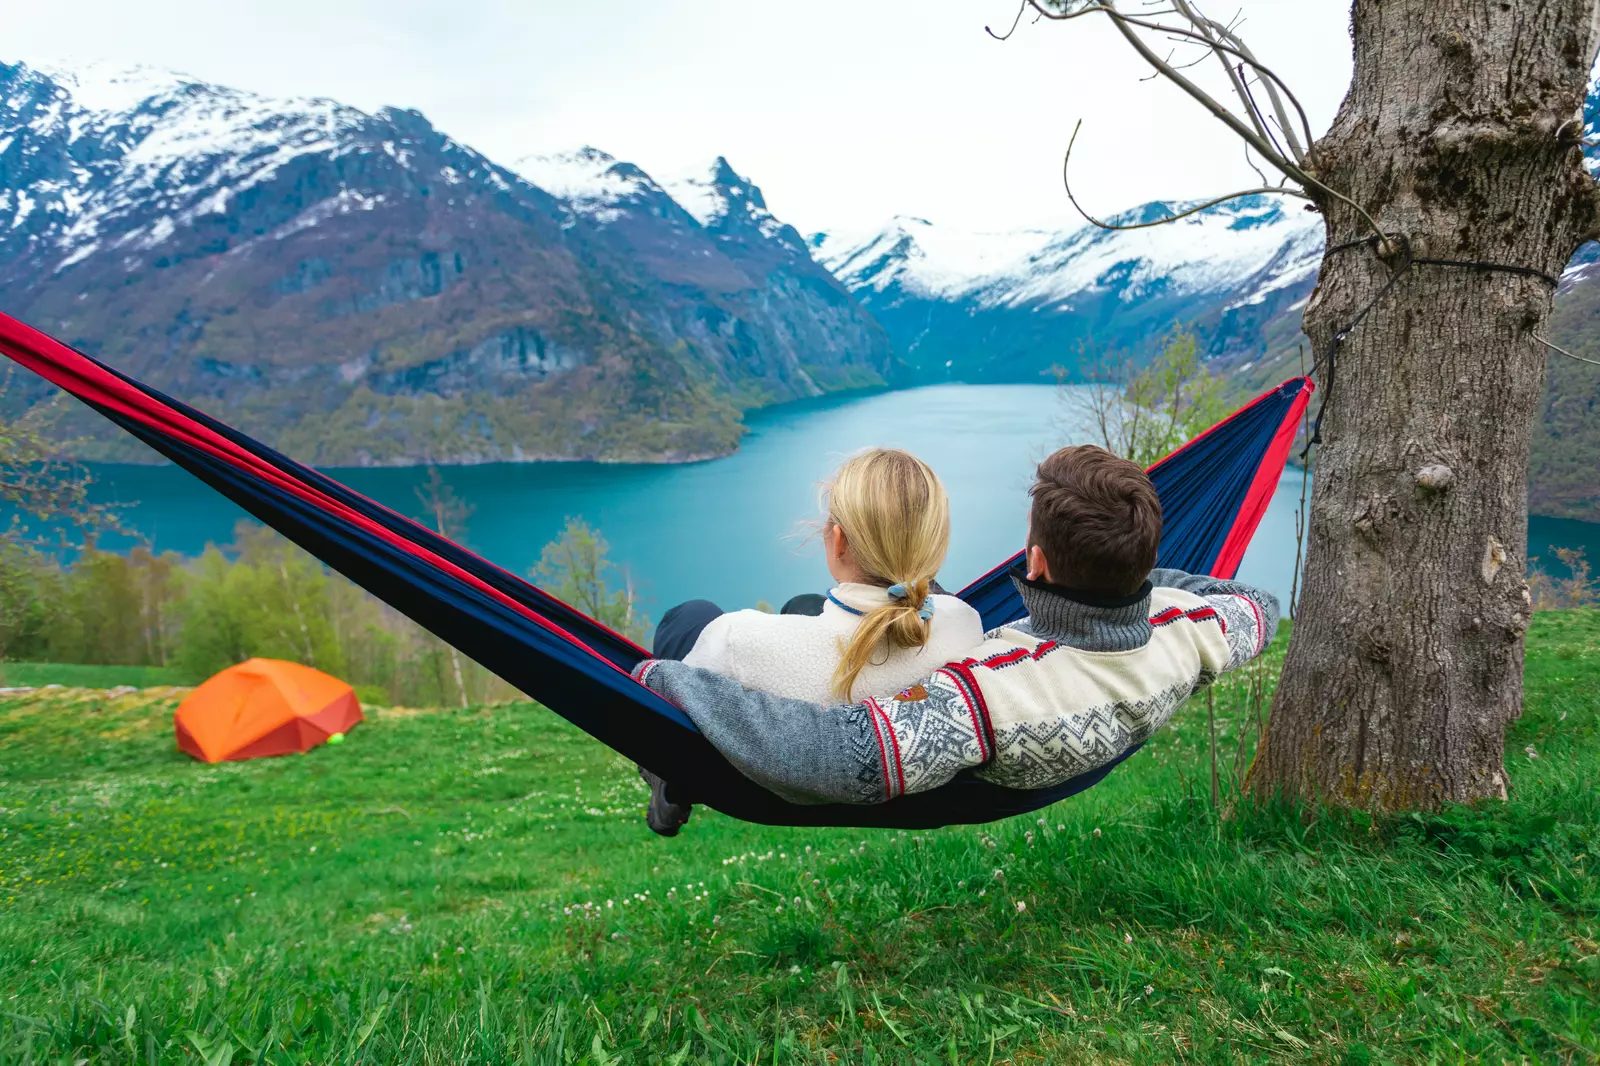 People in nature, Natural environment, Sky, Plant, Mountain, Hammock, Tree, Leisure, Lake